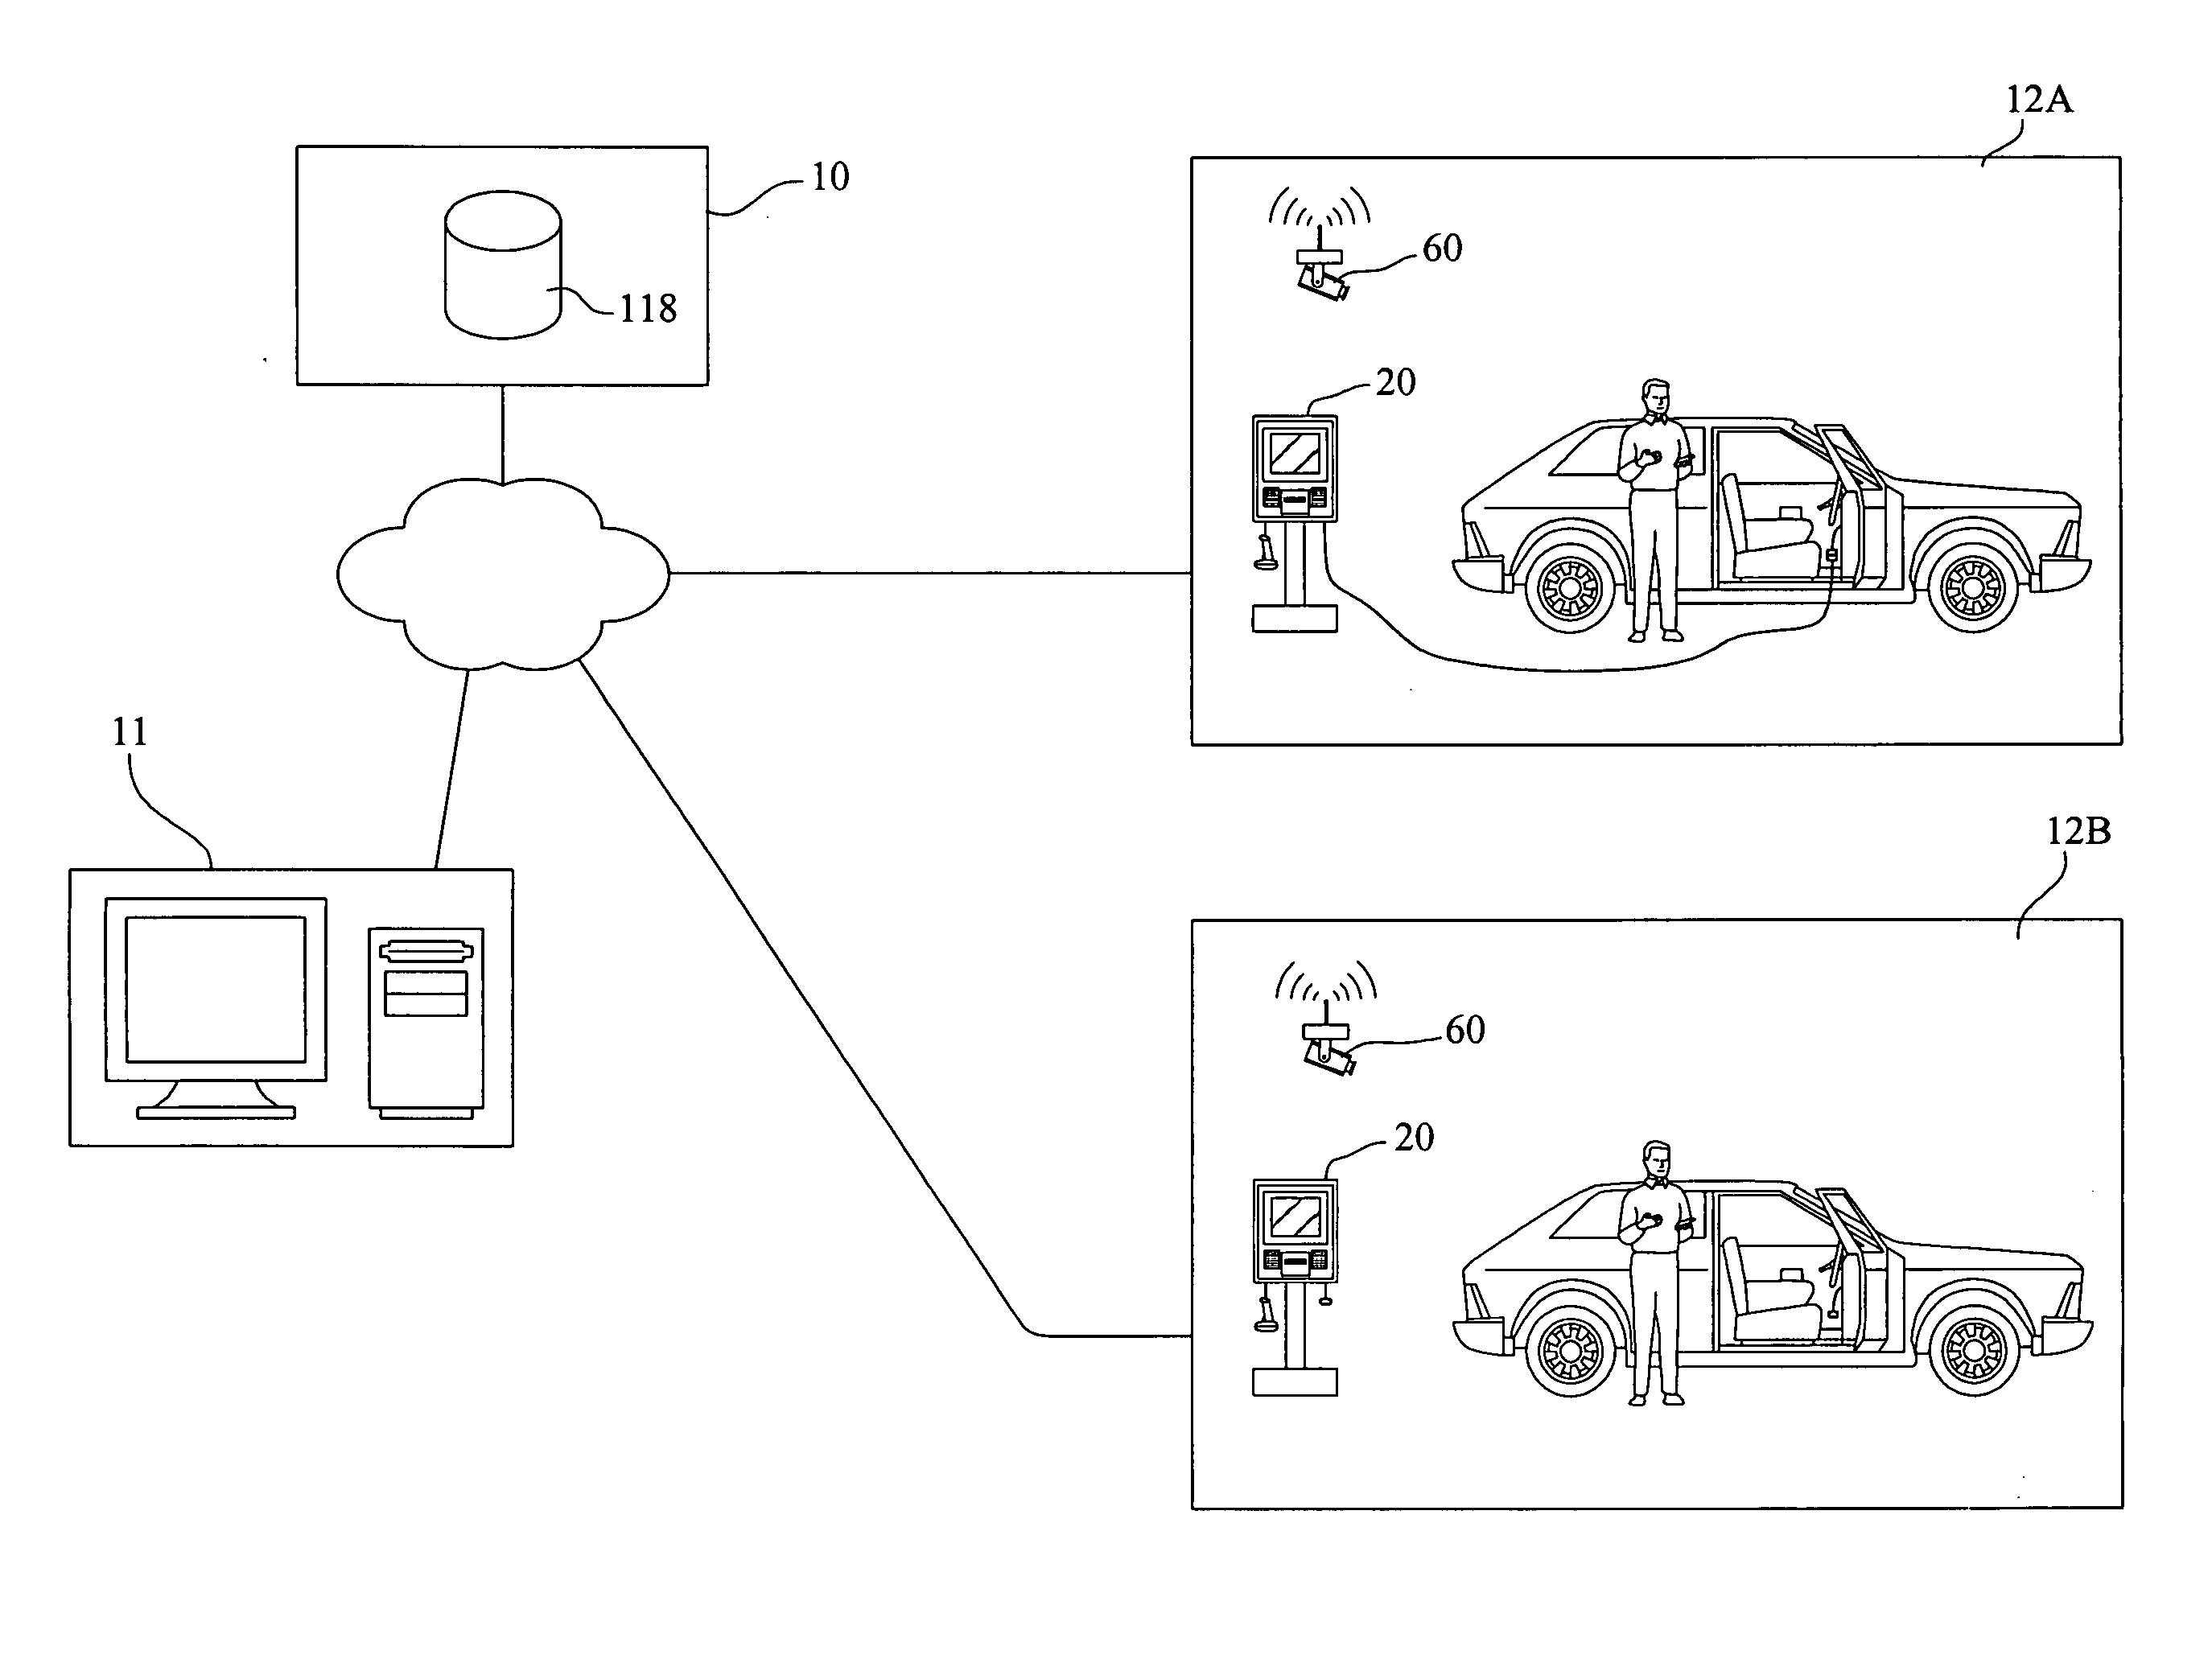 Method and system for vehicle emissions testing at a kiosk through on-board diagnostics unit inspection